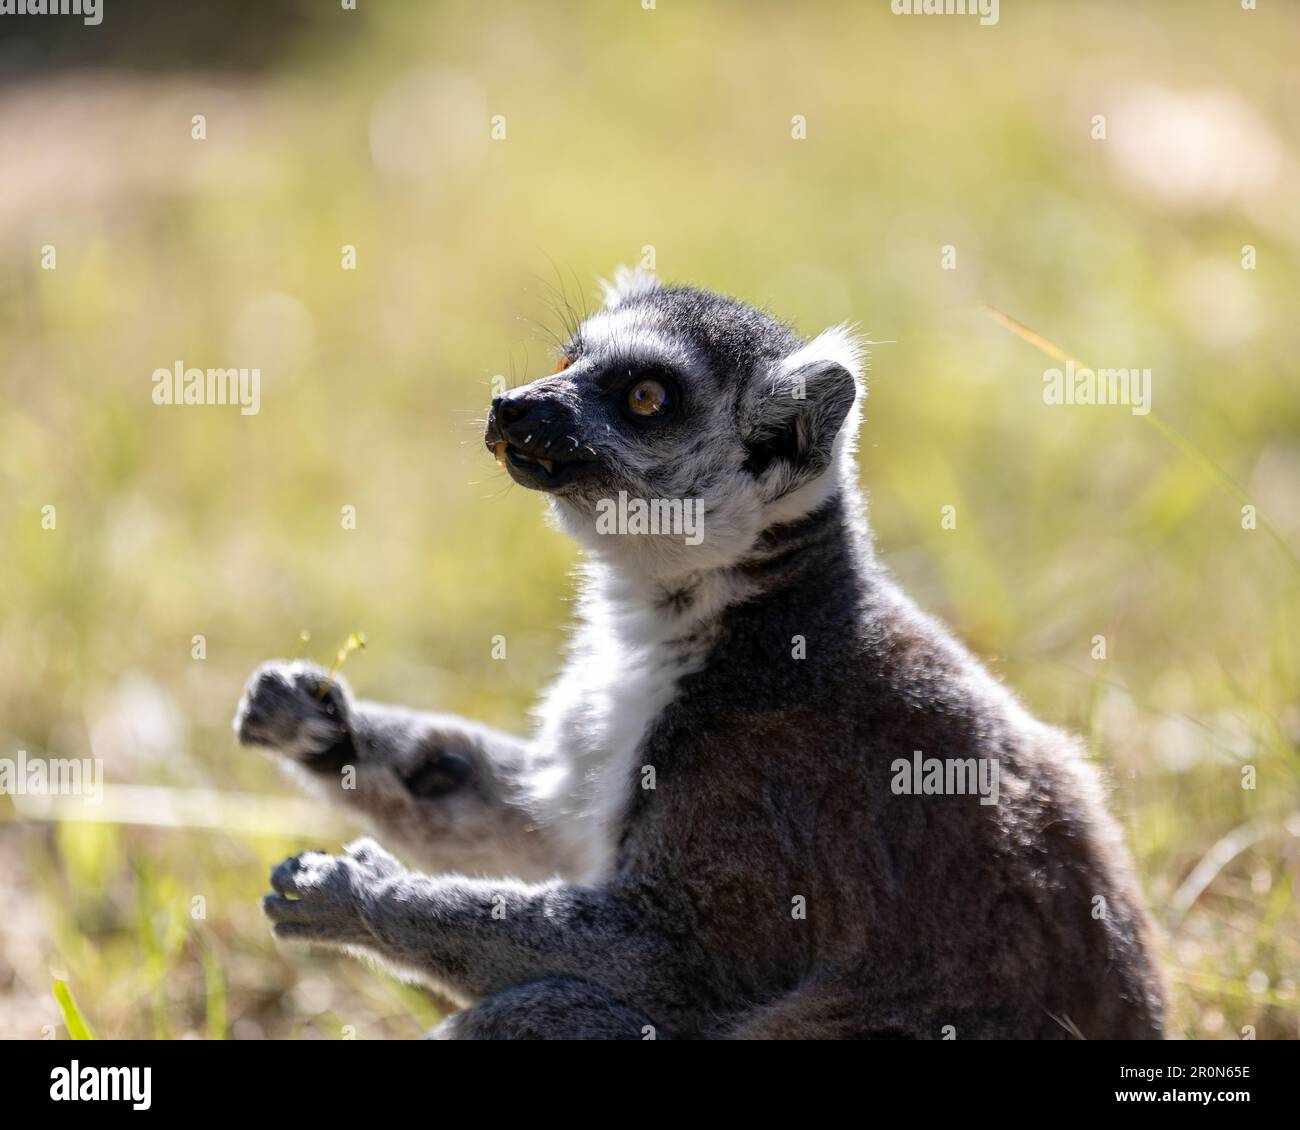 A cute baby lemur stands alert, its paws spread wide as it surveys its surroundings Stock Photo